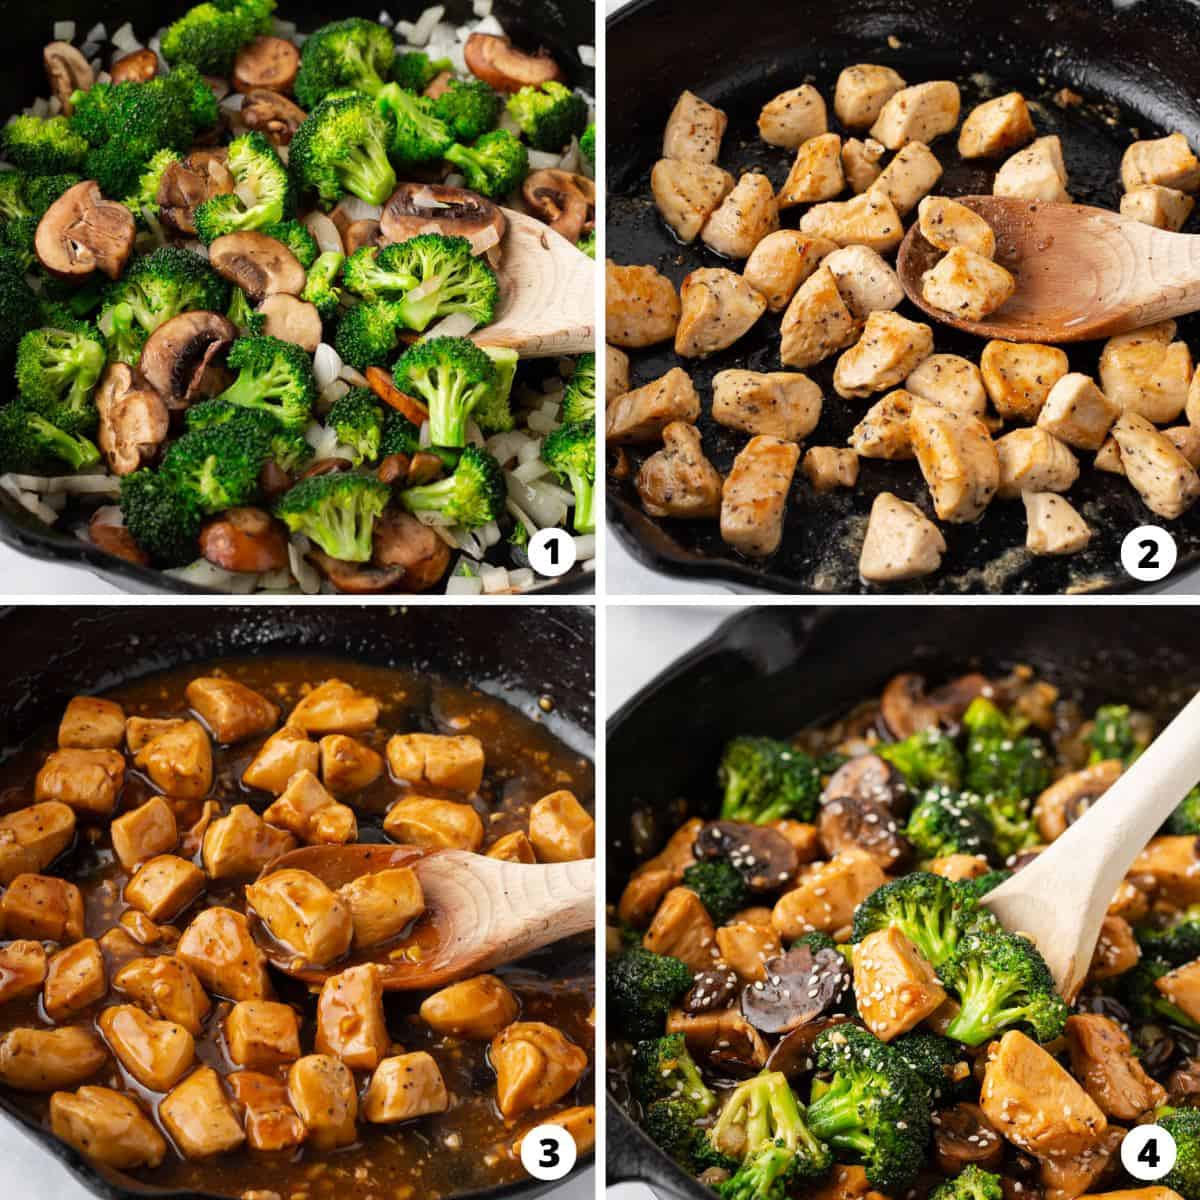 Showing how to make chicken and broccoli stir fry in a 4 step collage.